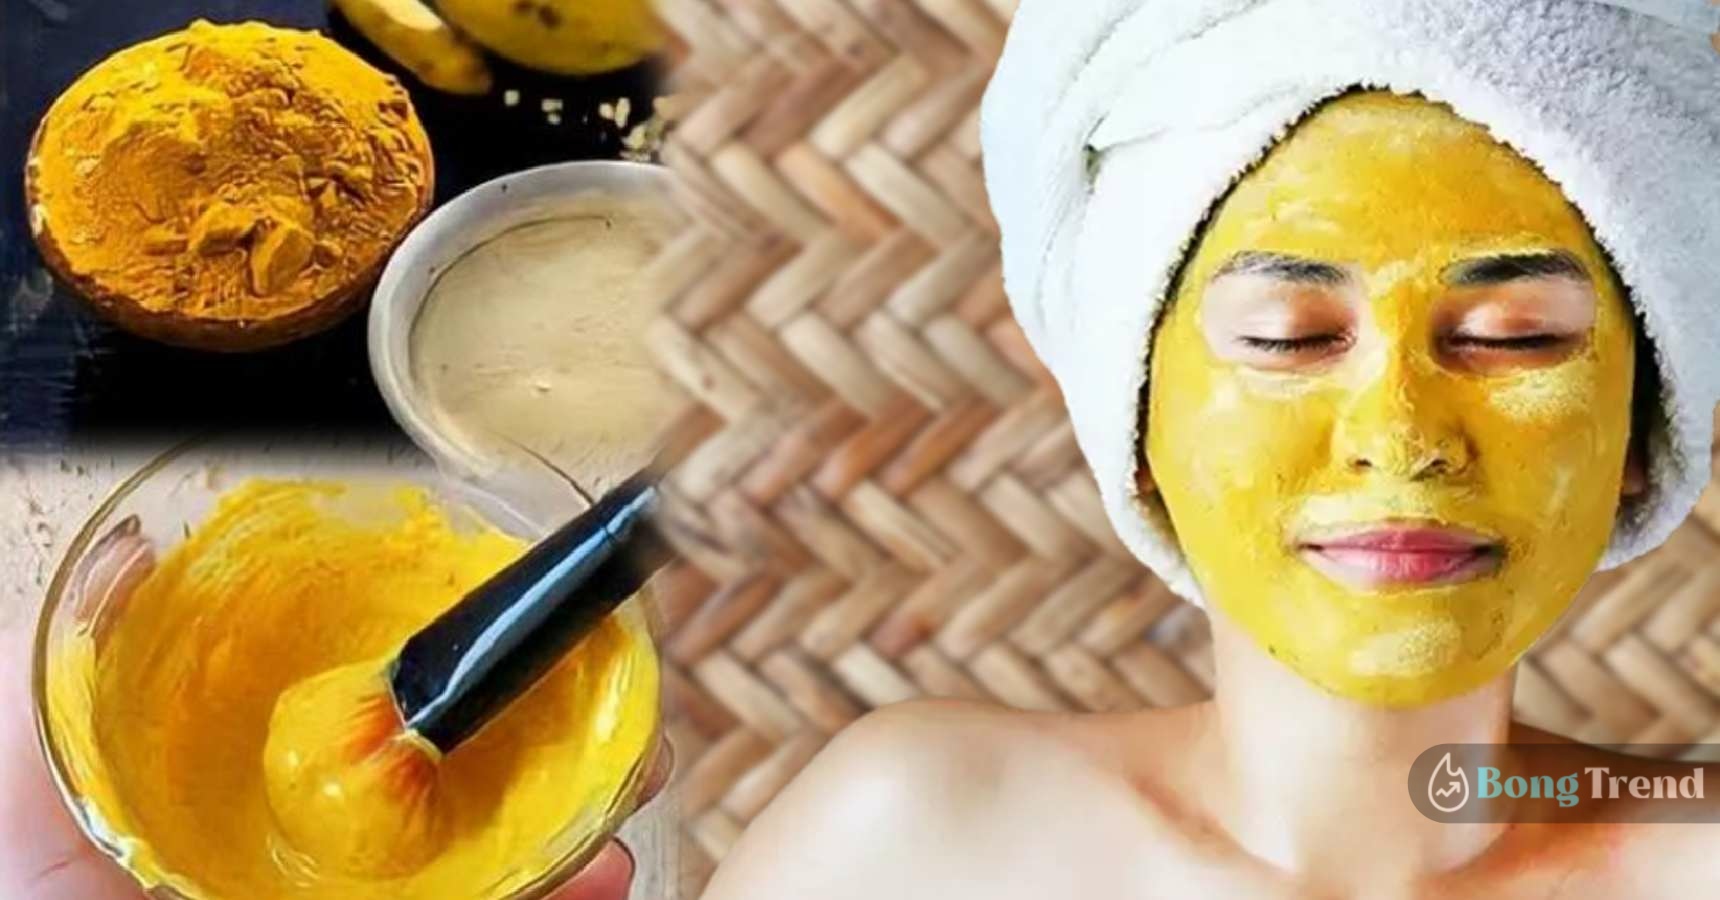 How to make gold facepack at home